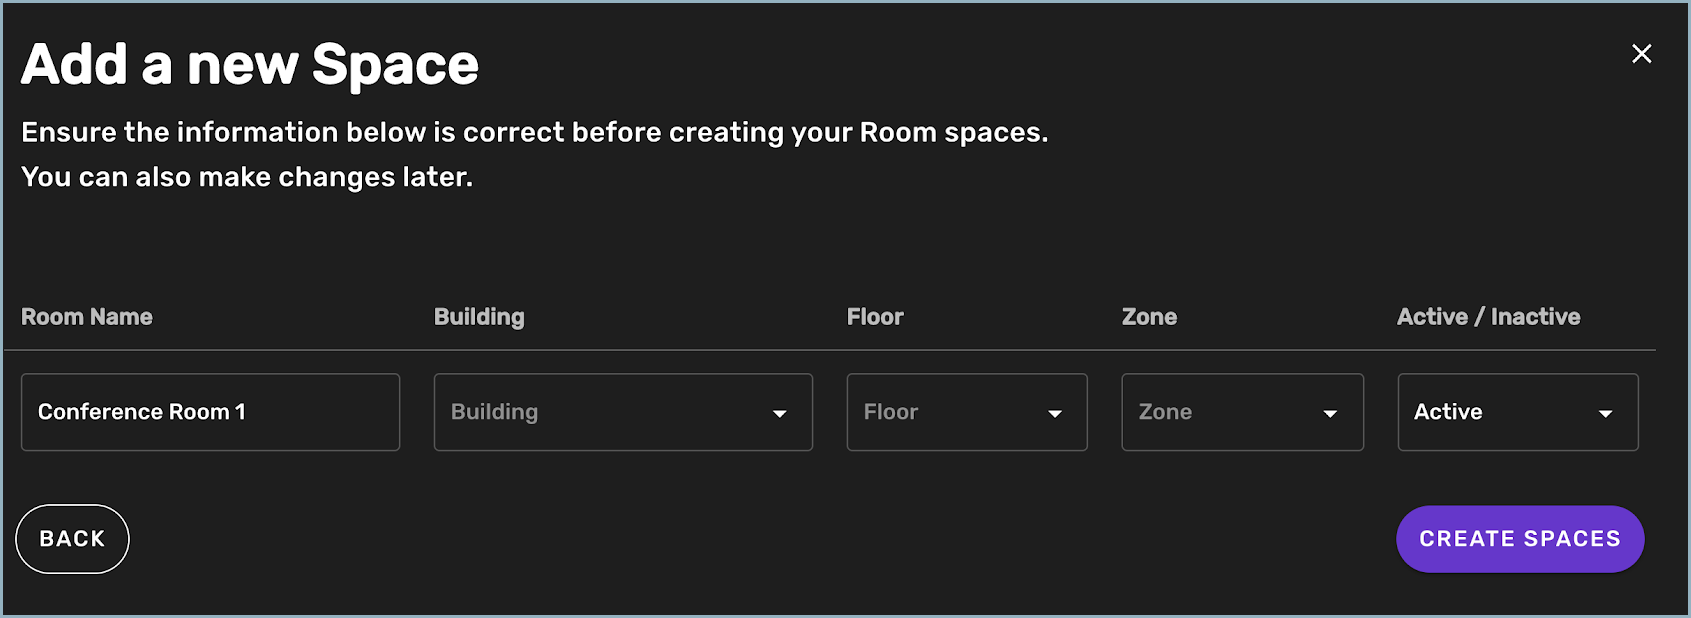 Add a new Space settings options